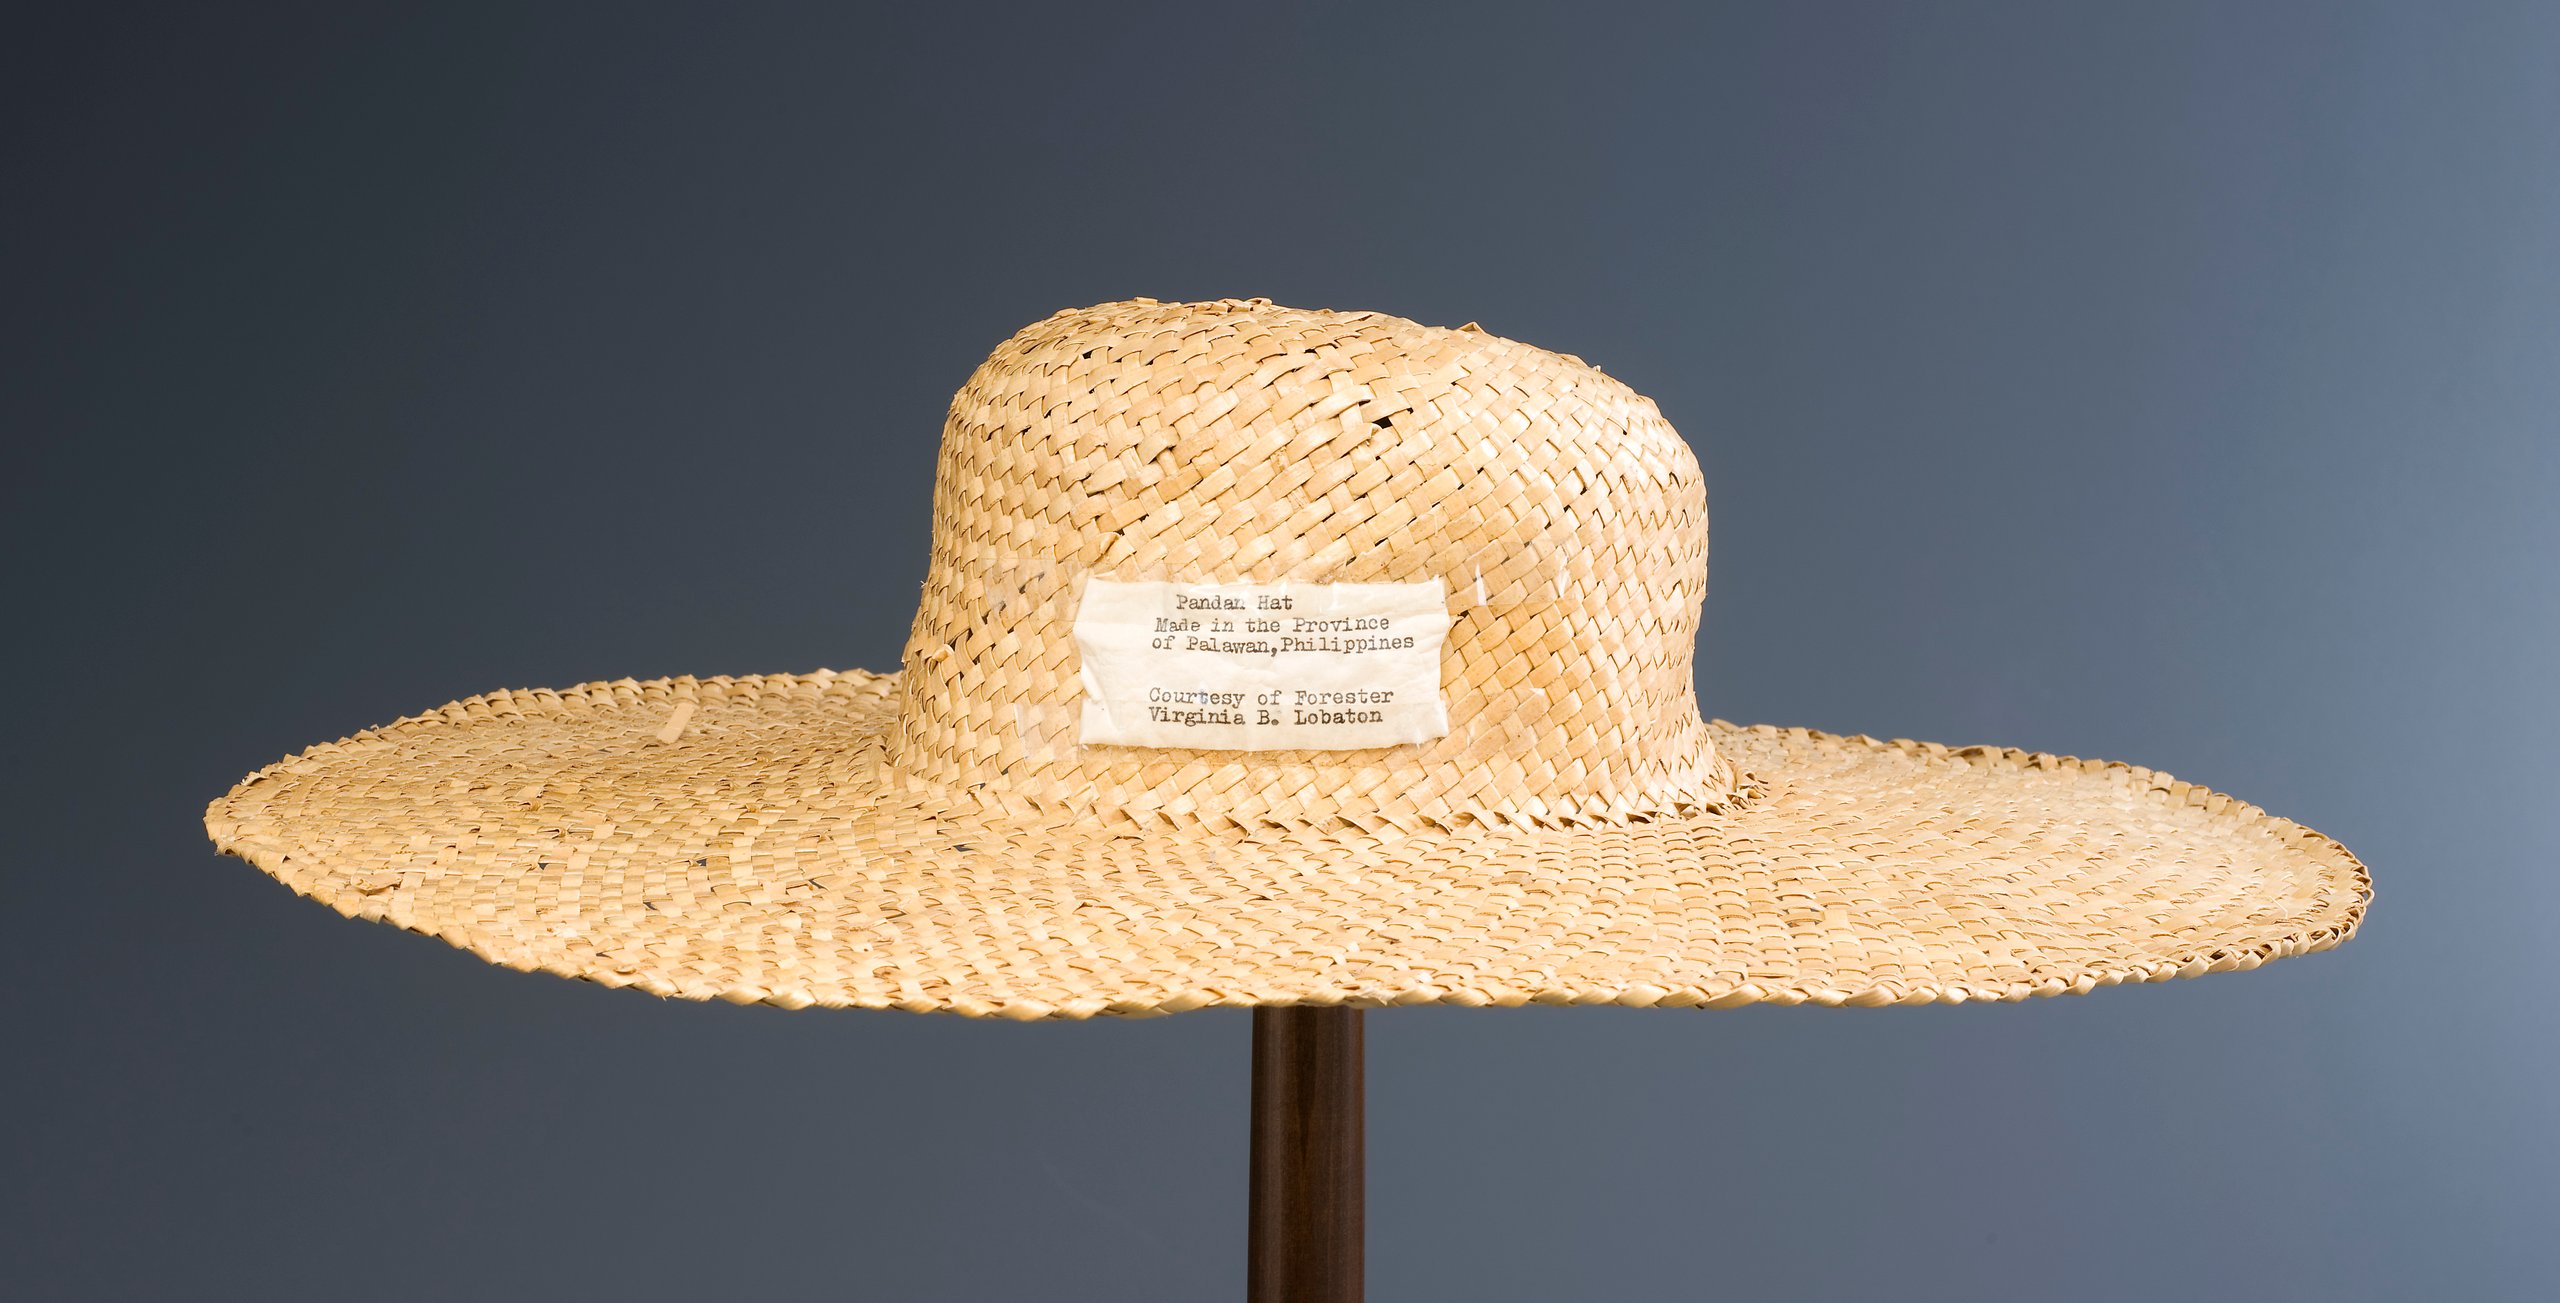 Four hats from the Philippines used by AusAID